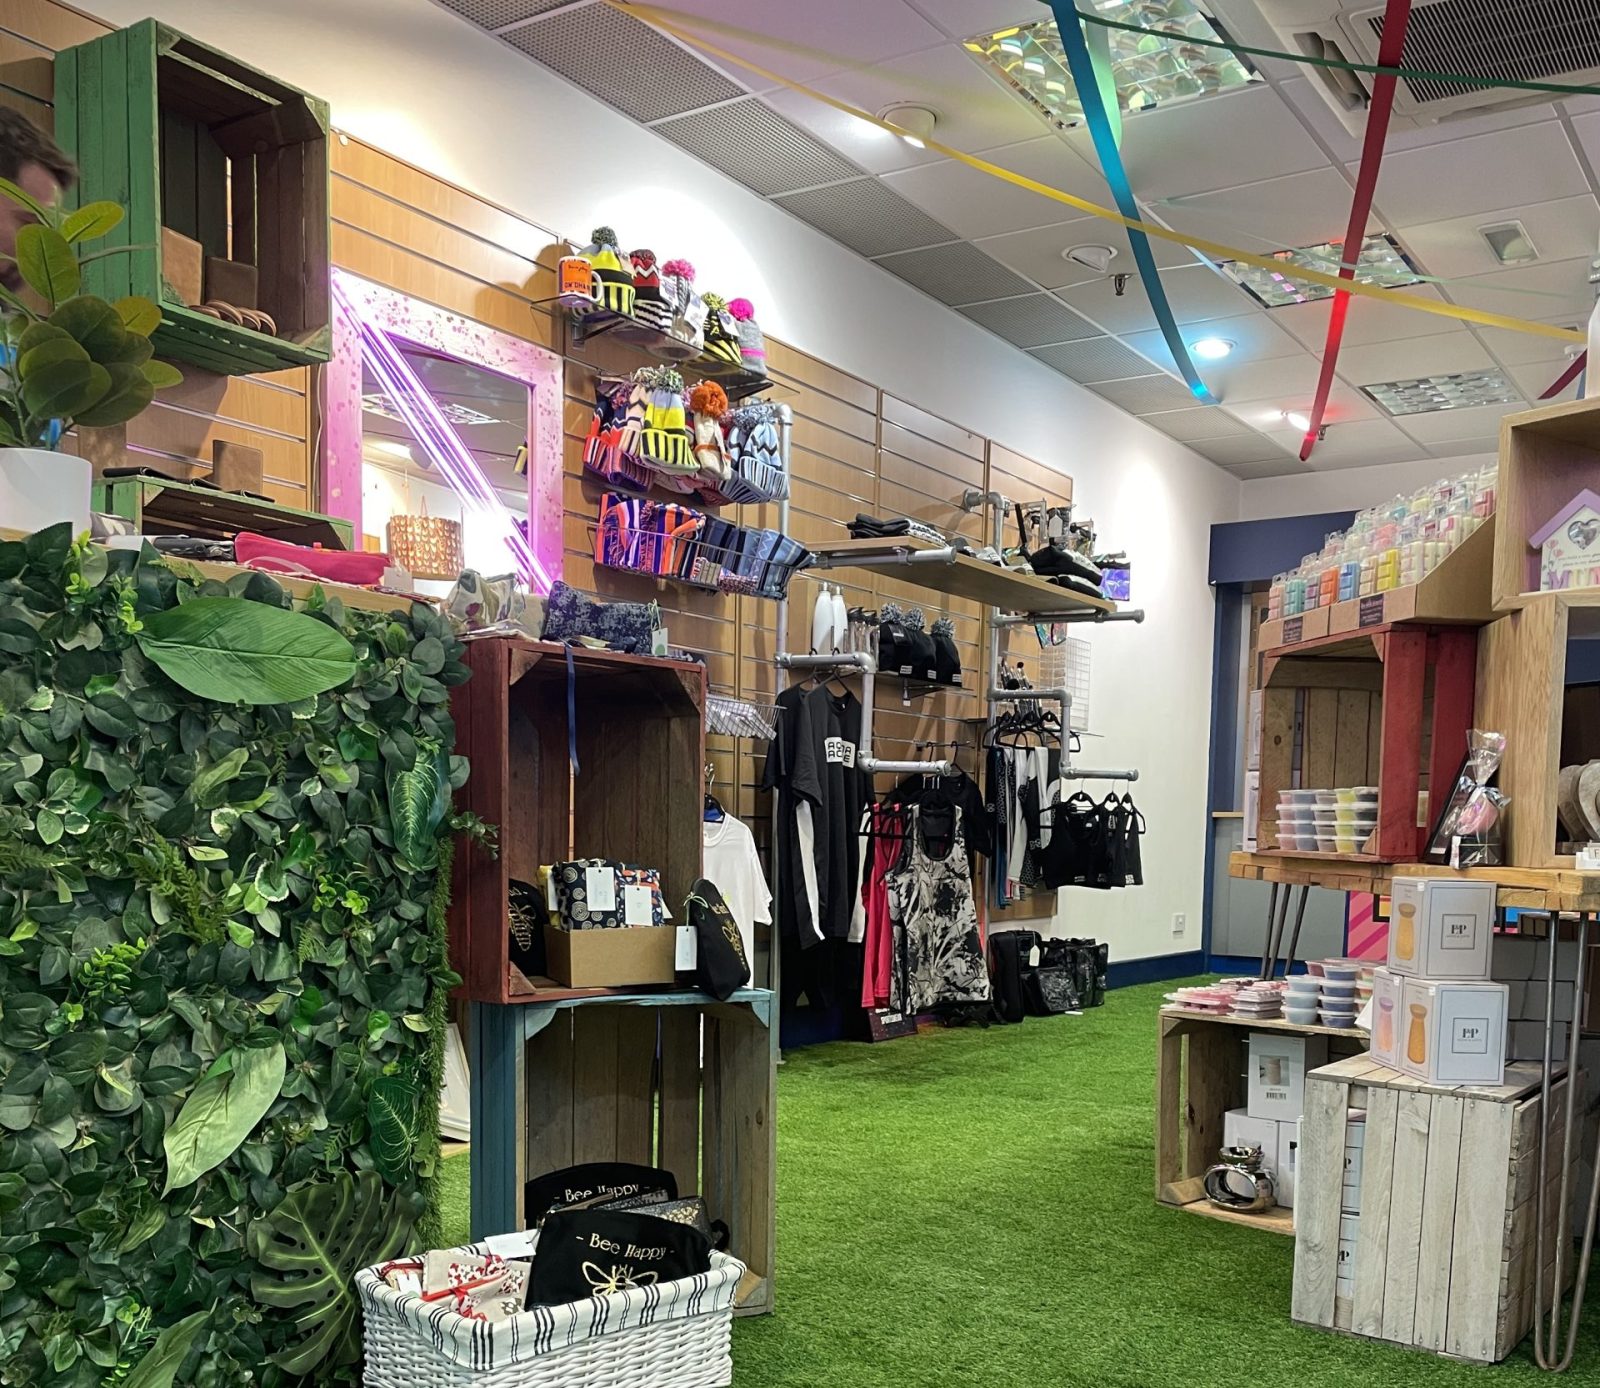 Pop-up shop full of handmade gifts opens in Oldham shopping centre this week, The Manc